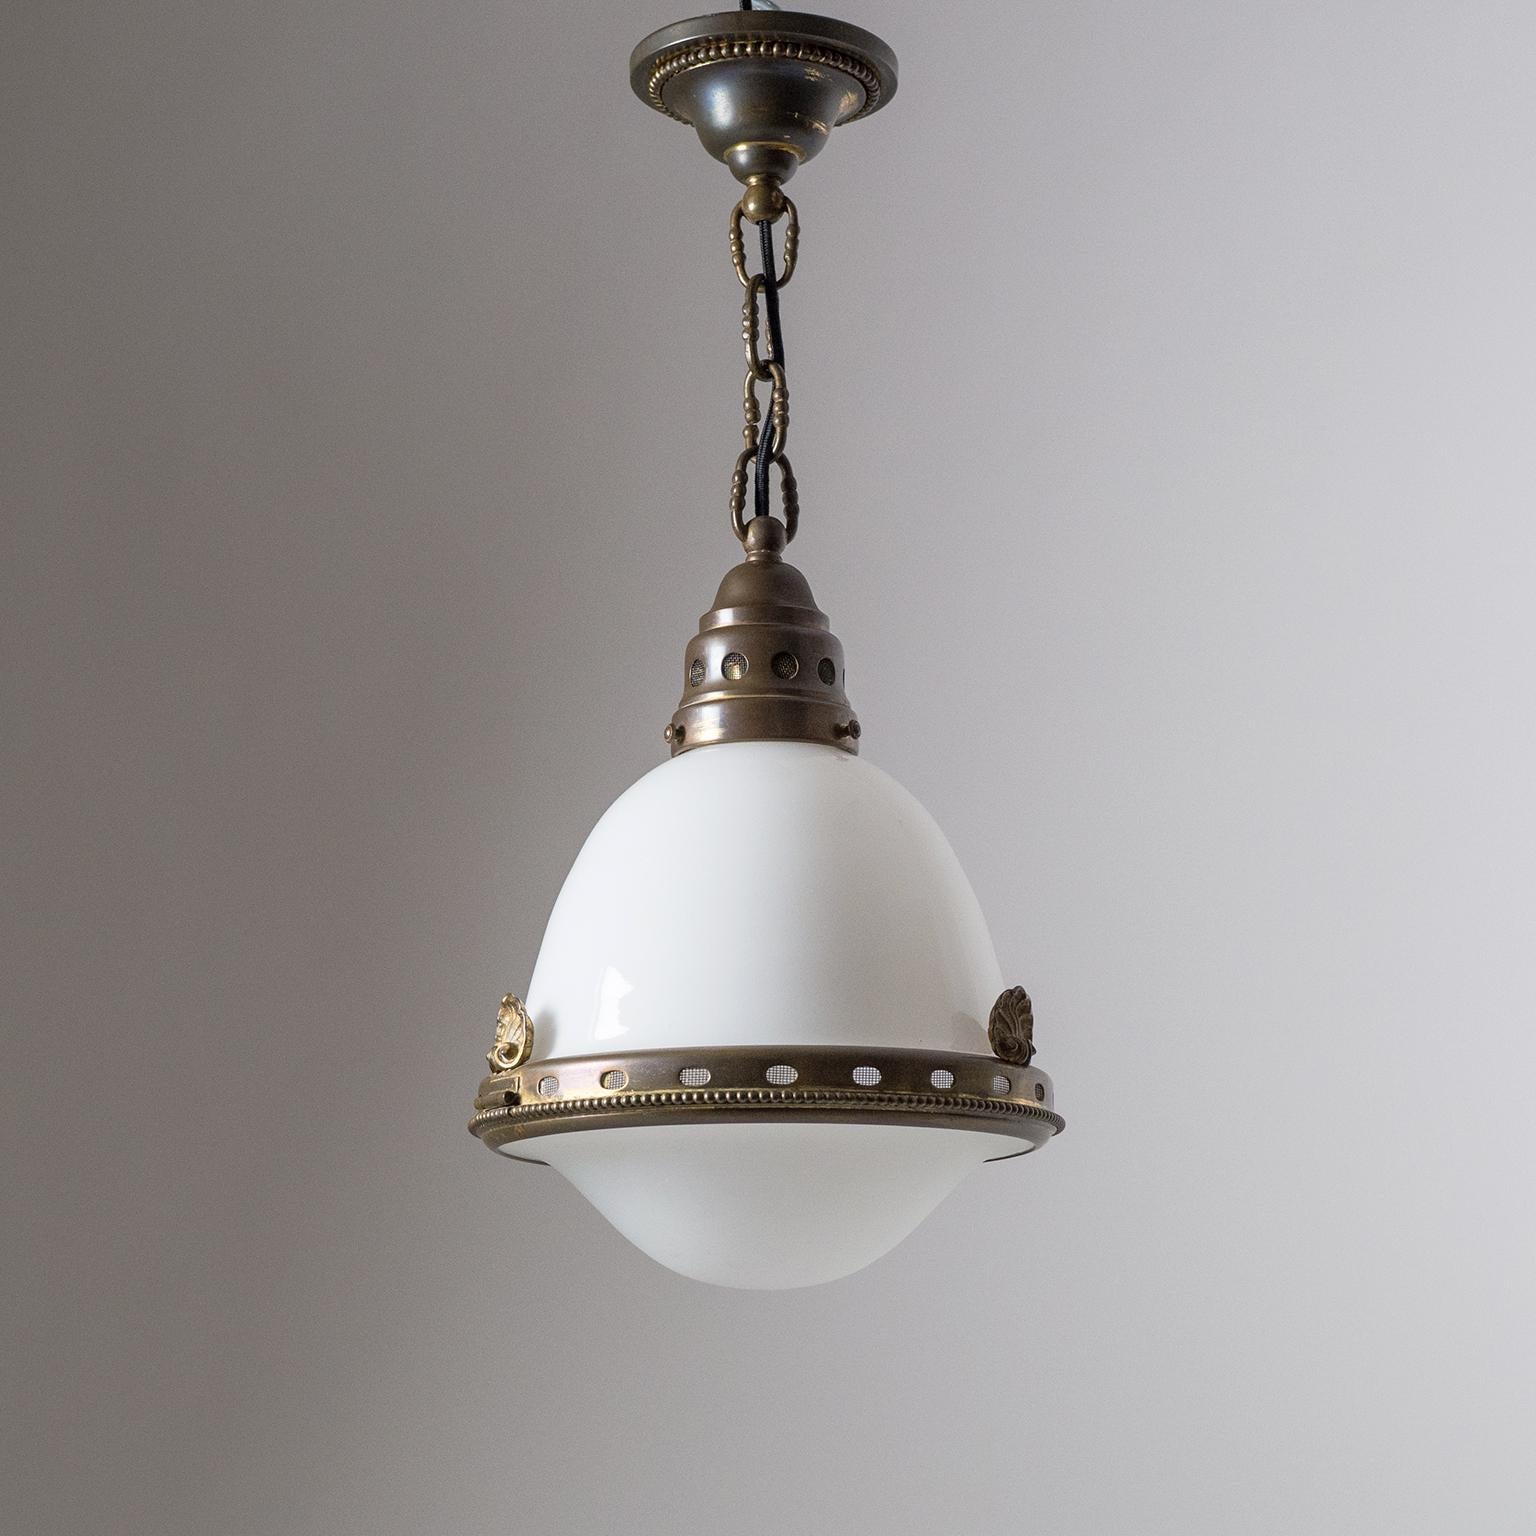 Very fine early 1900s Austrian pendant or lantern. Very intricately worked brass elements with lots of attention to detail. The diffuser is composed of two blown glass parts: The upper is glossy with a white inner casing, and the bottom is